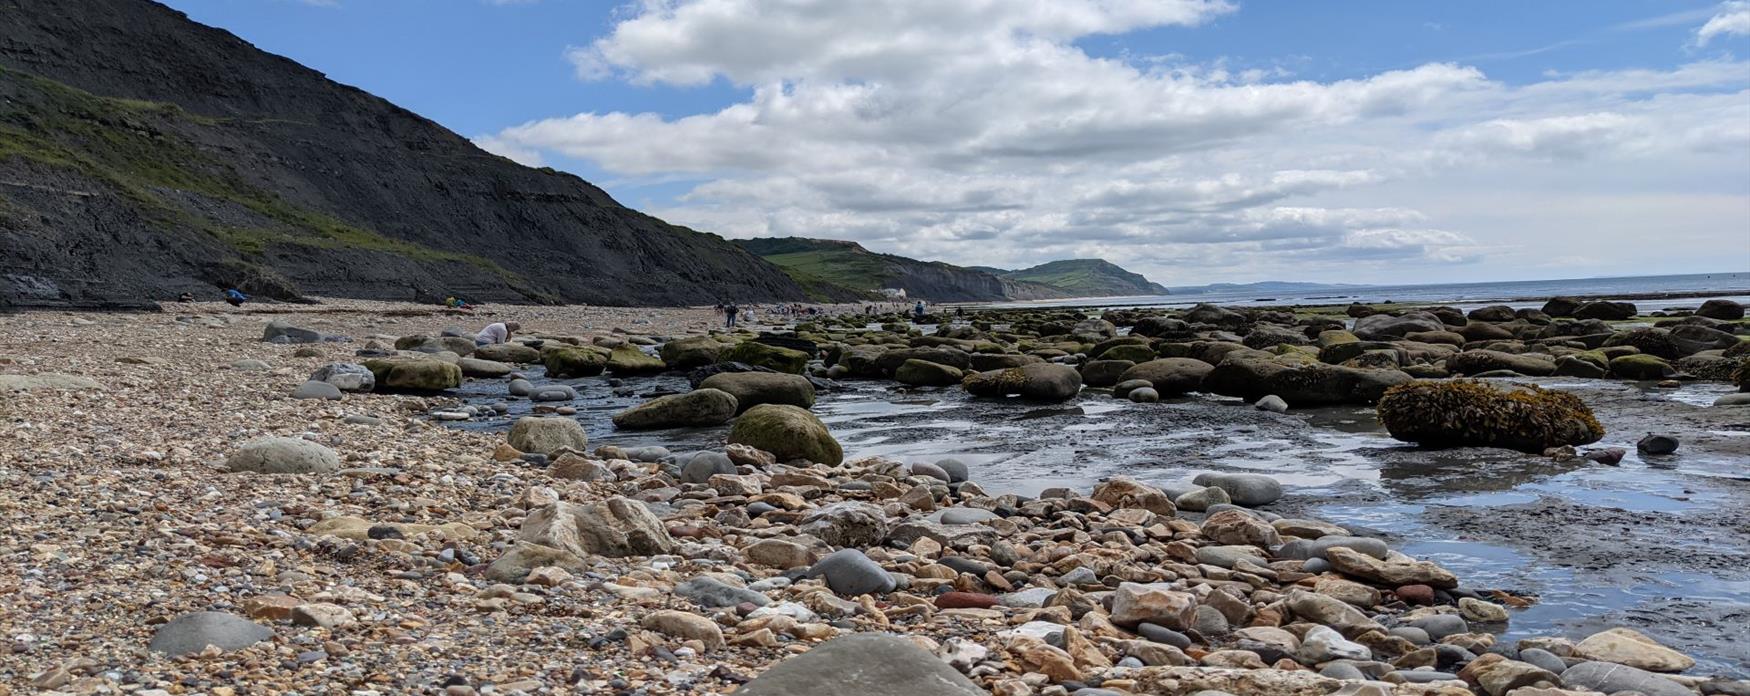 A pebble beach with dark grey limestone/ mud-looking cliffs. The pebbles/boulders near the sea have green algae showing it is low tide. The undulating cliffs from Charmouth extend off into the distance from the photographer. The sun is bright but there are a few fluffy white clouds in the sky.